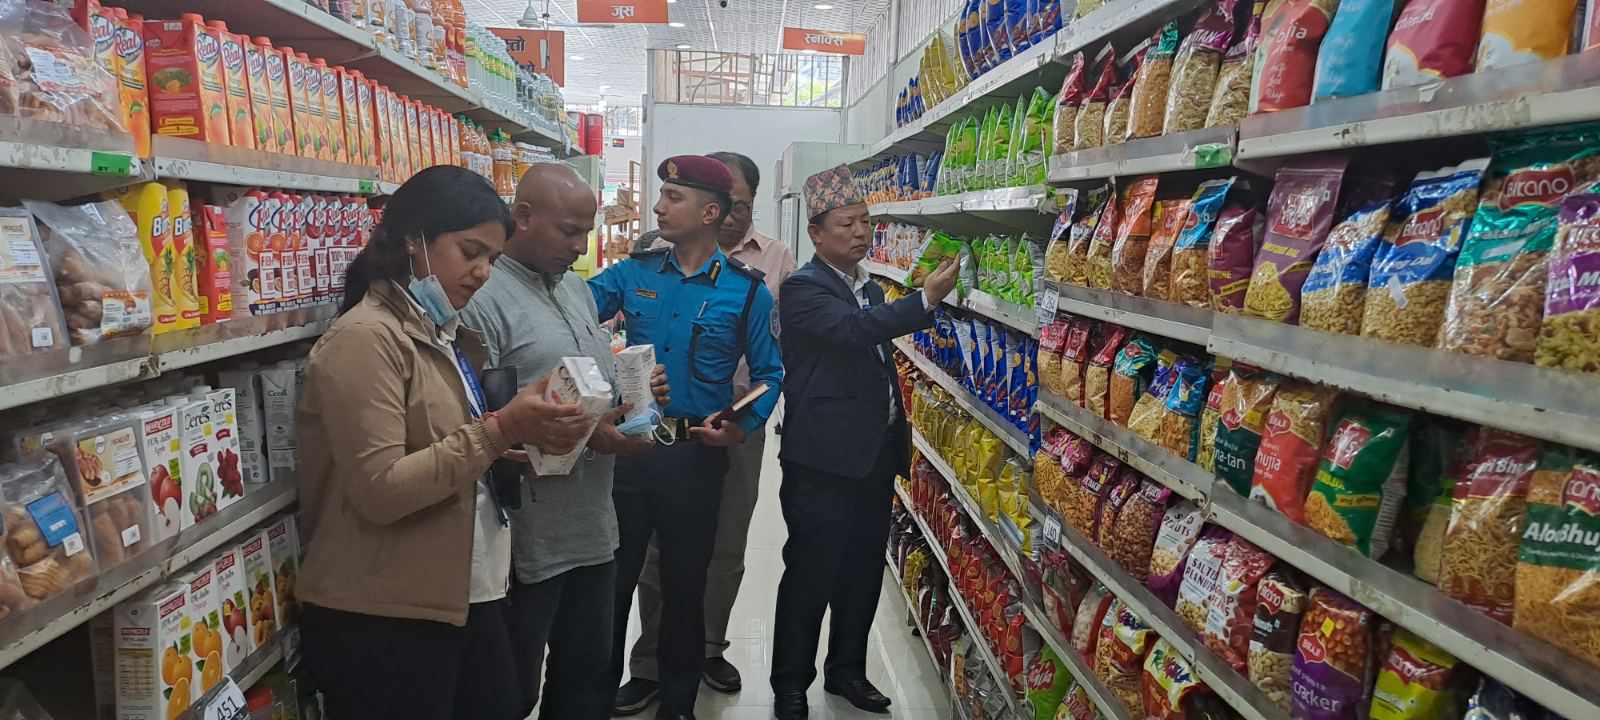 Bhatbhateni store at Pulchowk fined Rs 100,000 for selling date-expired foods